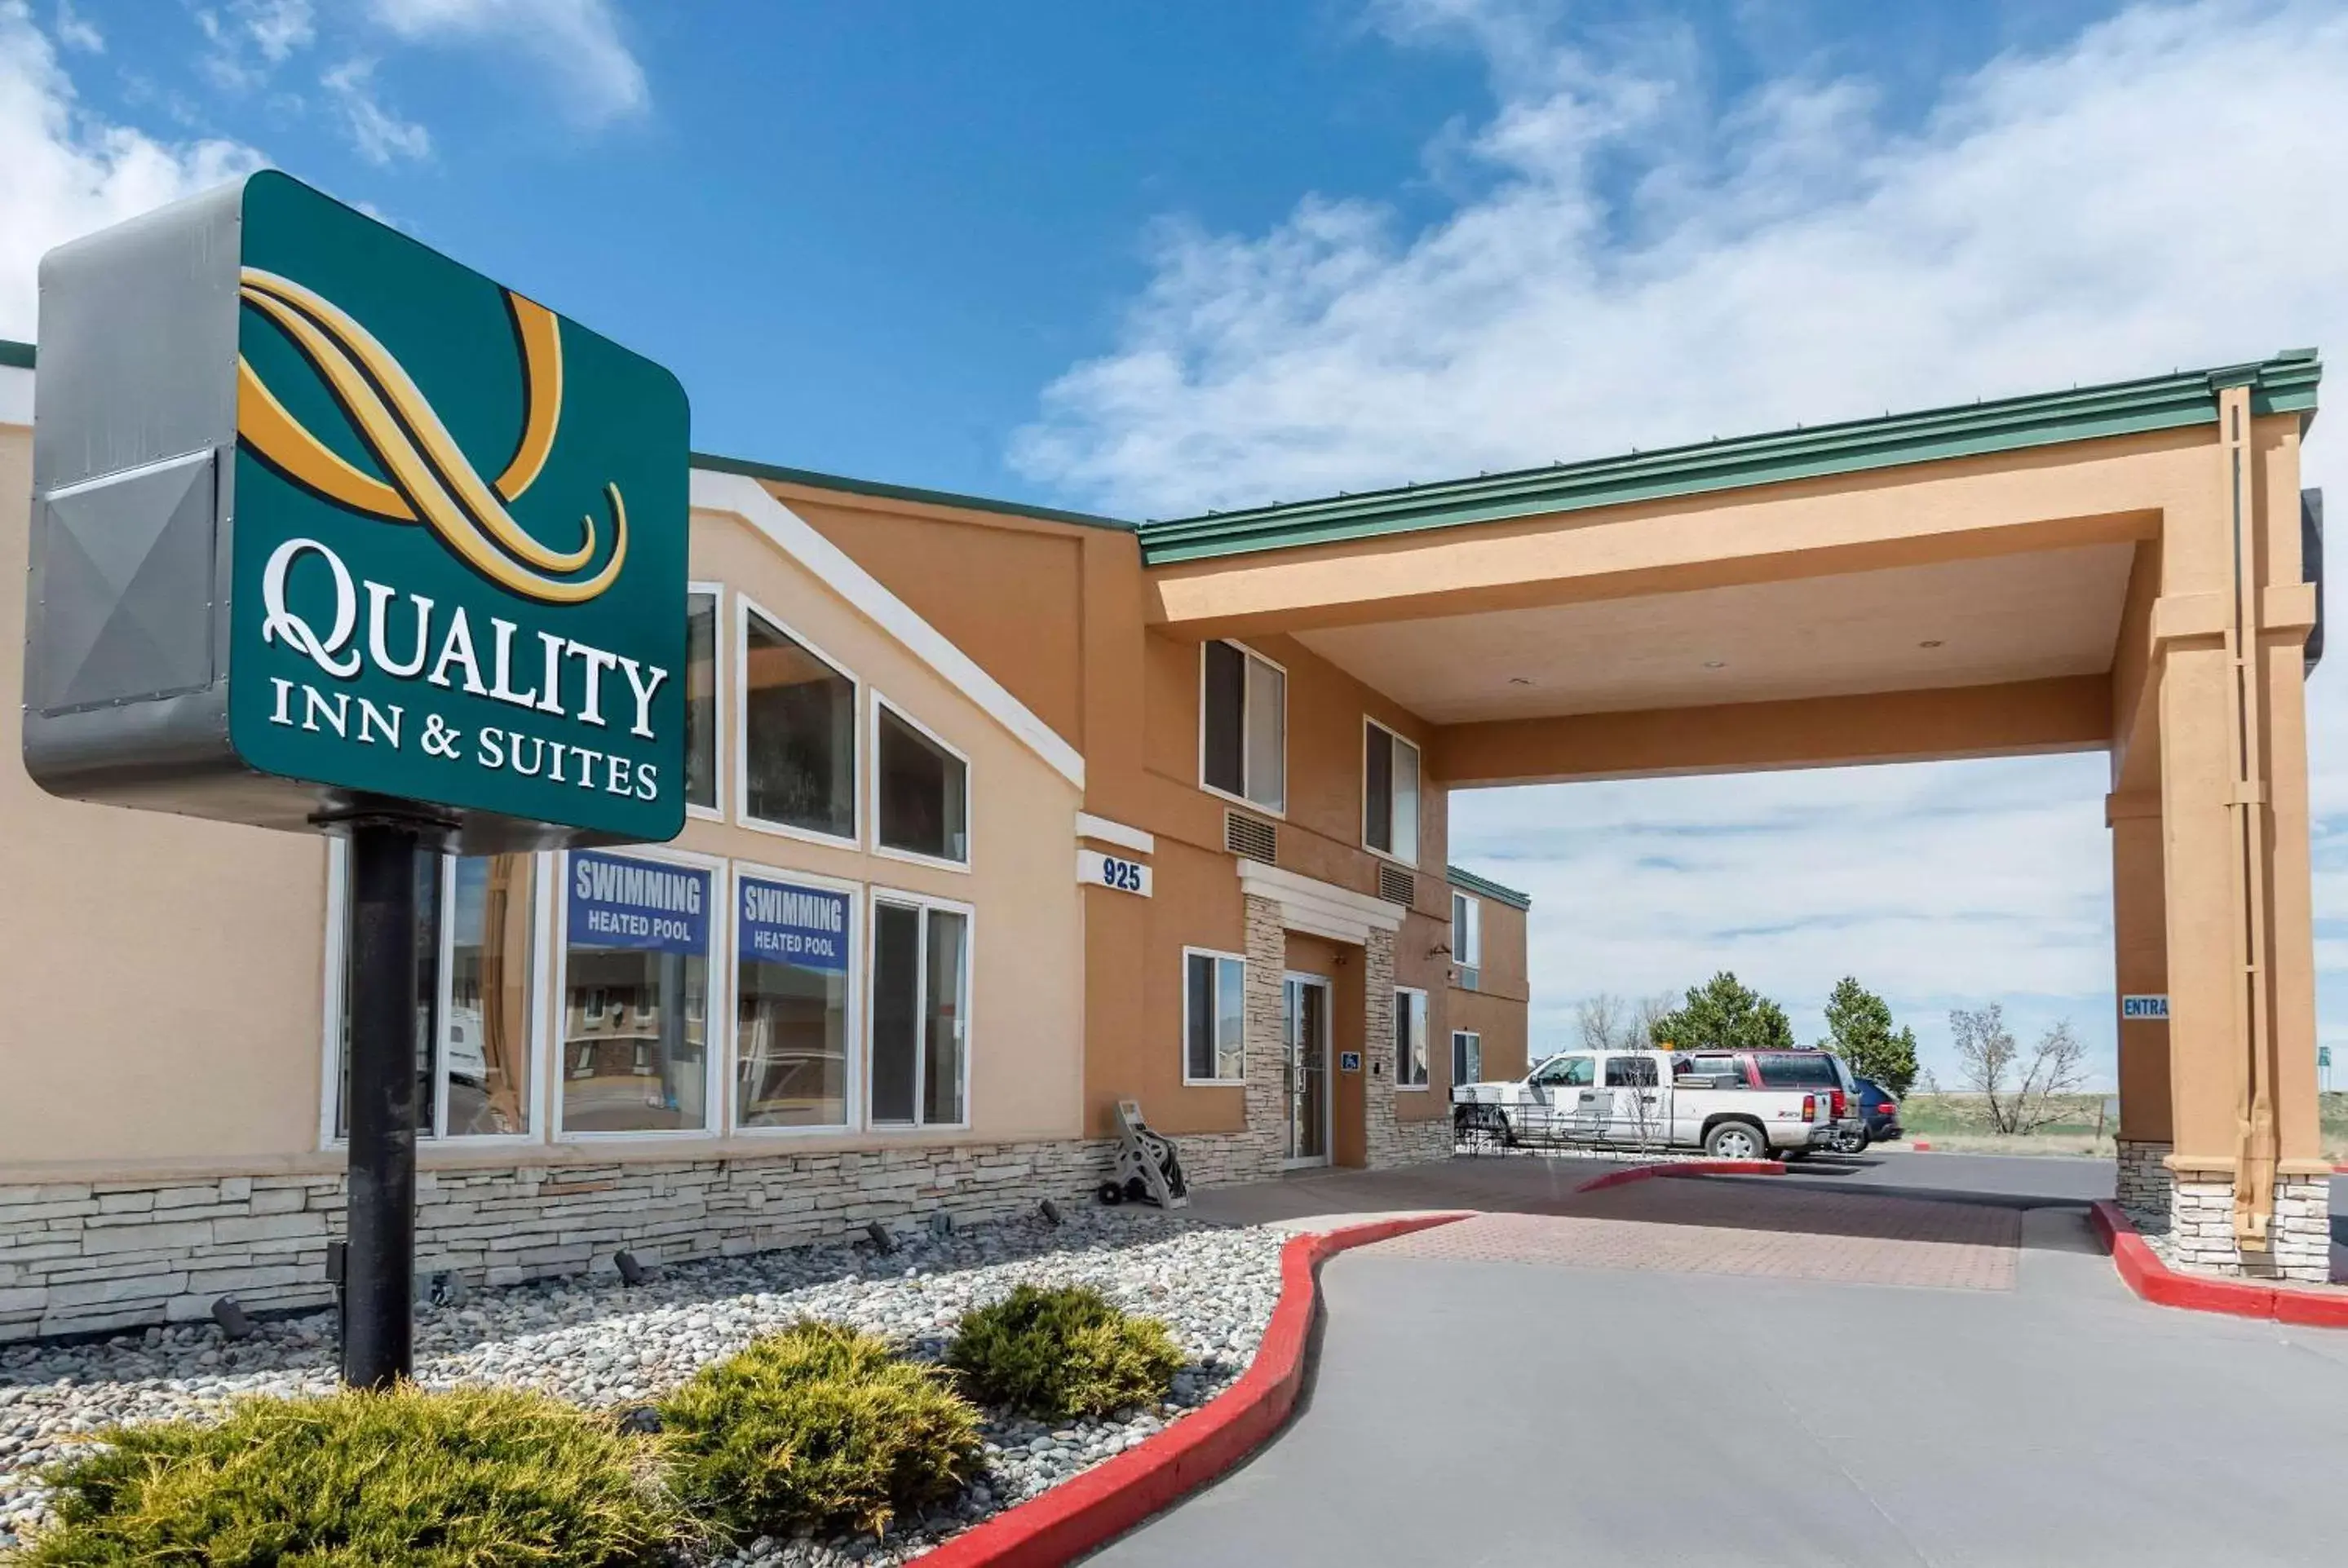 Property Building in Quality Inn & Suites Limon